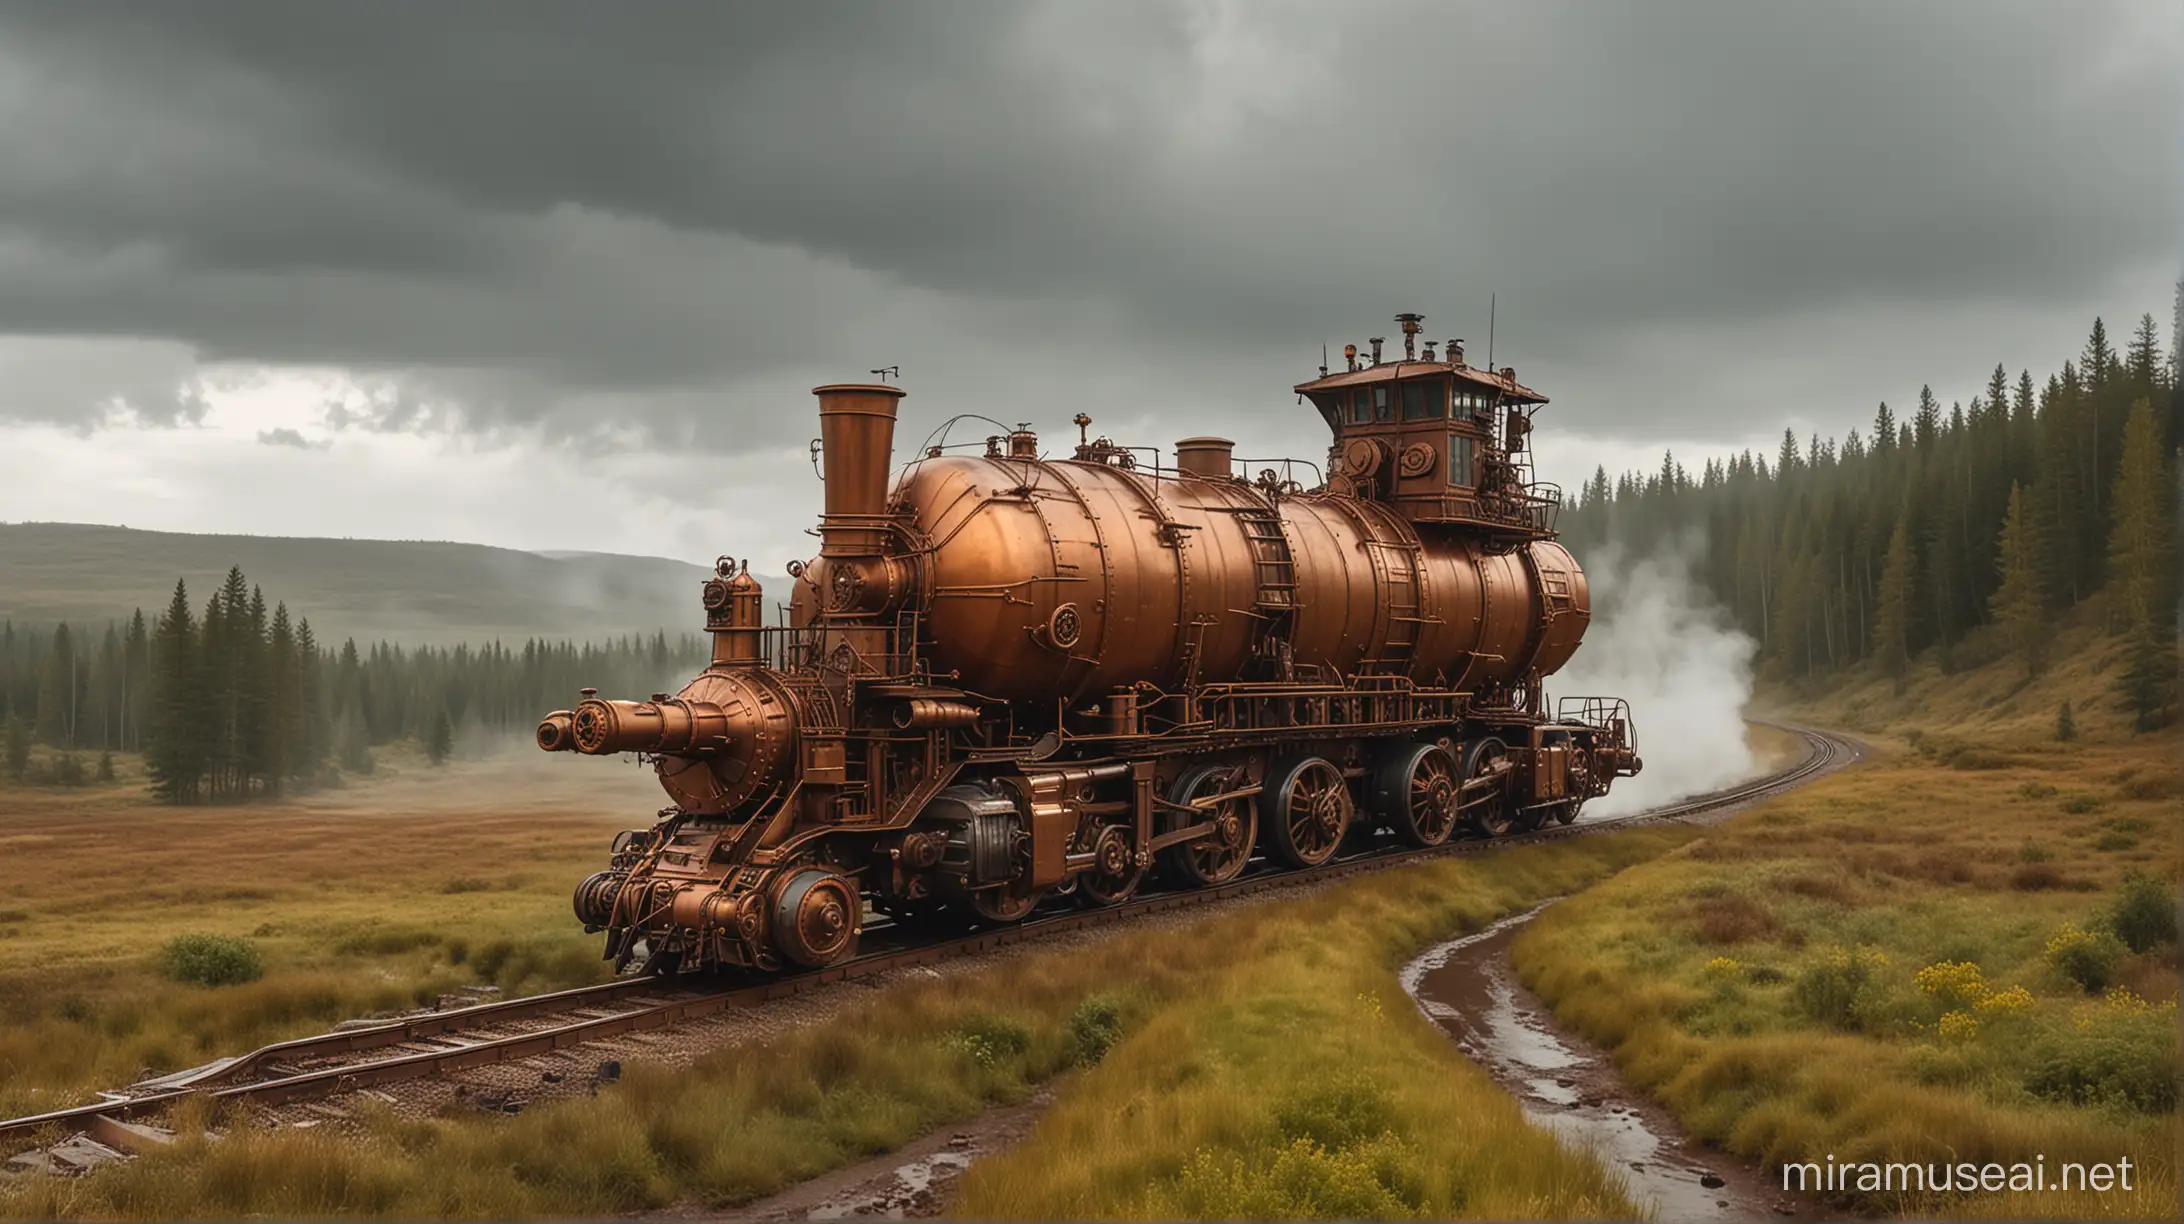 Majestic Steampunk Vehicle Crossing Wild Ditch in Rainy Wilderness